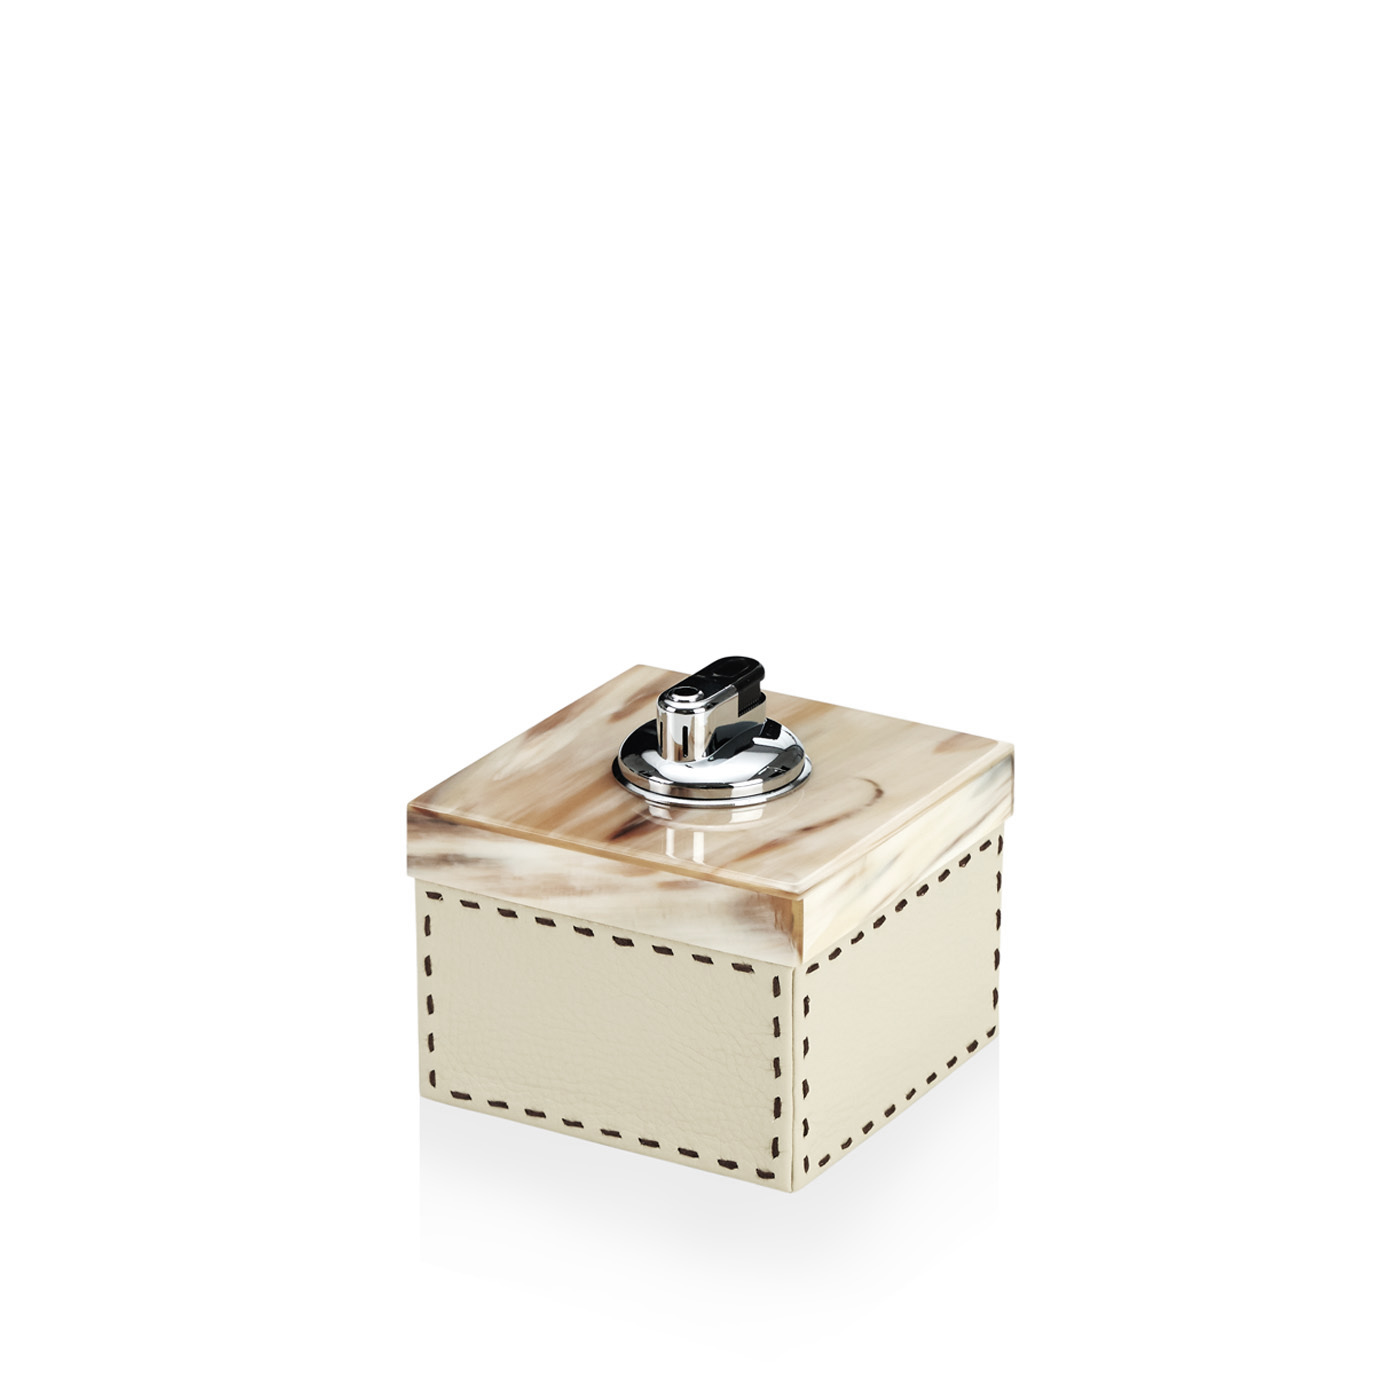 Office sets and smoking accessories - Geremia tissue box holder in horn and  lacquered wood- Arcahorn